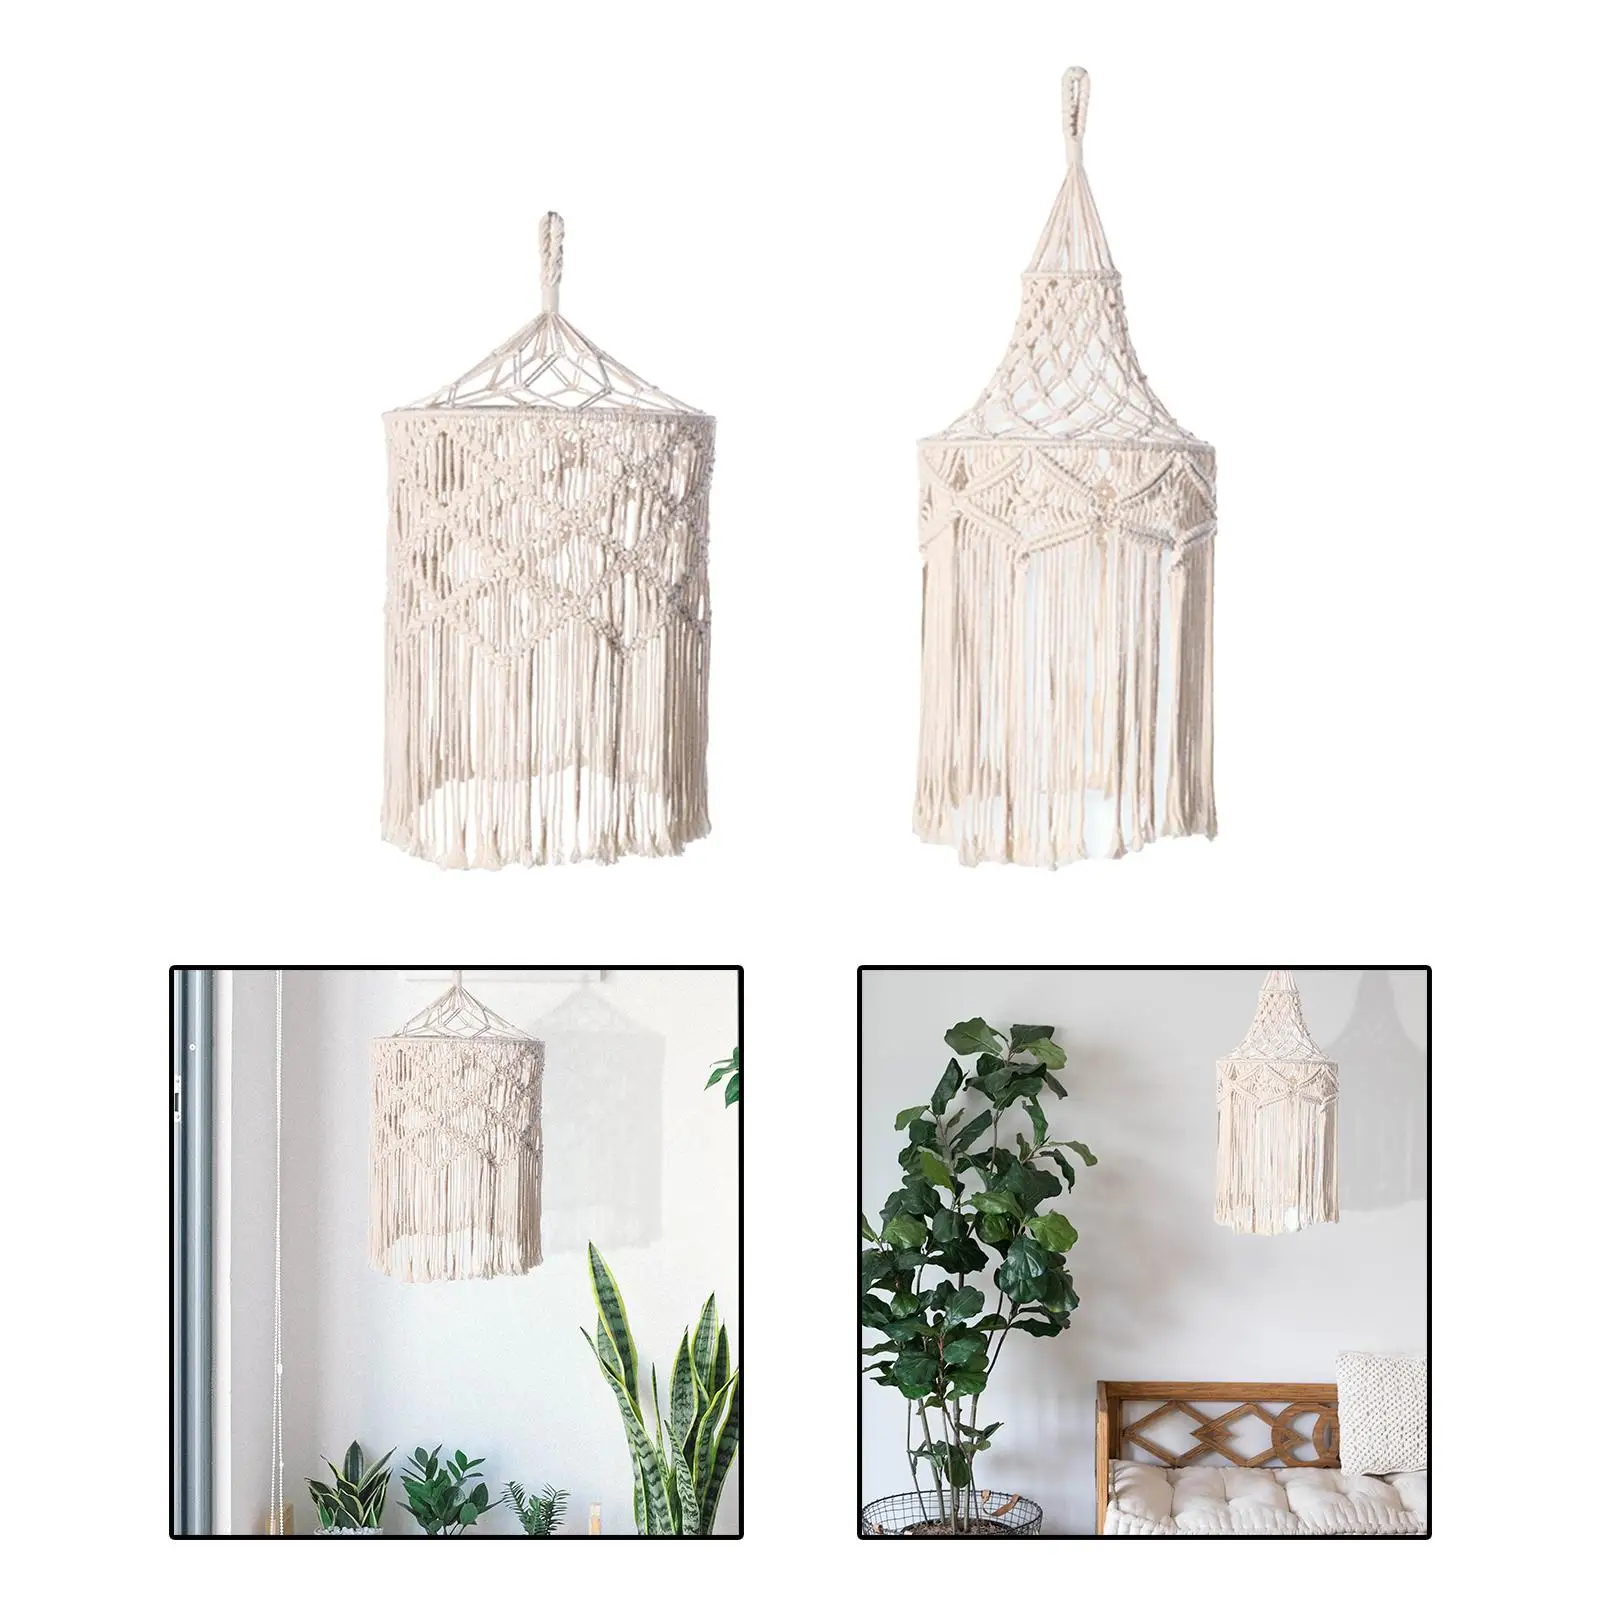 Ceiling Lights Fixture Cover Fitting Home Rustic Boho Hanging Pendant Light Cover Macrame Lampshade for Dorm Bedroom Kitchen